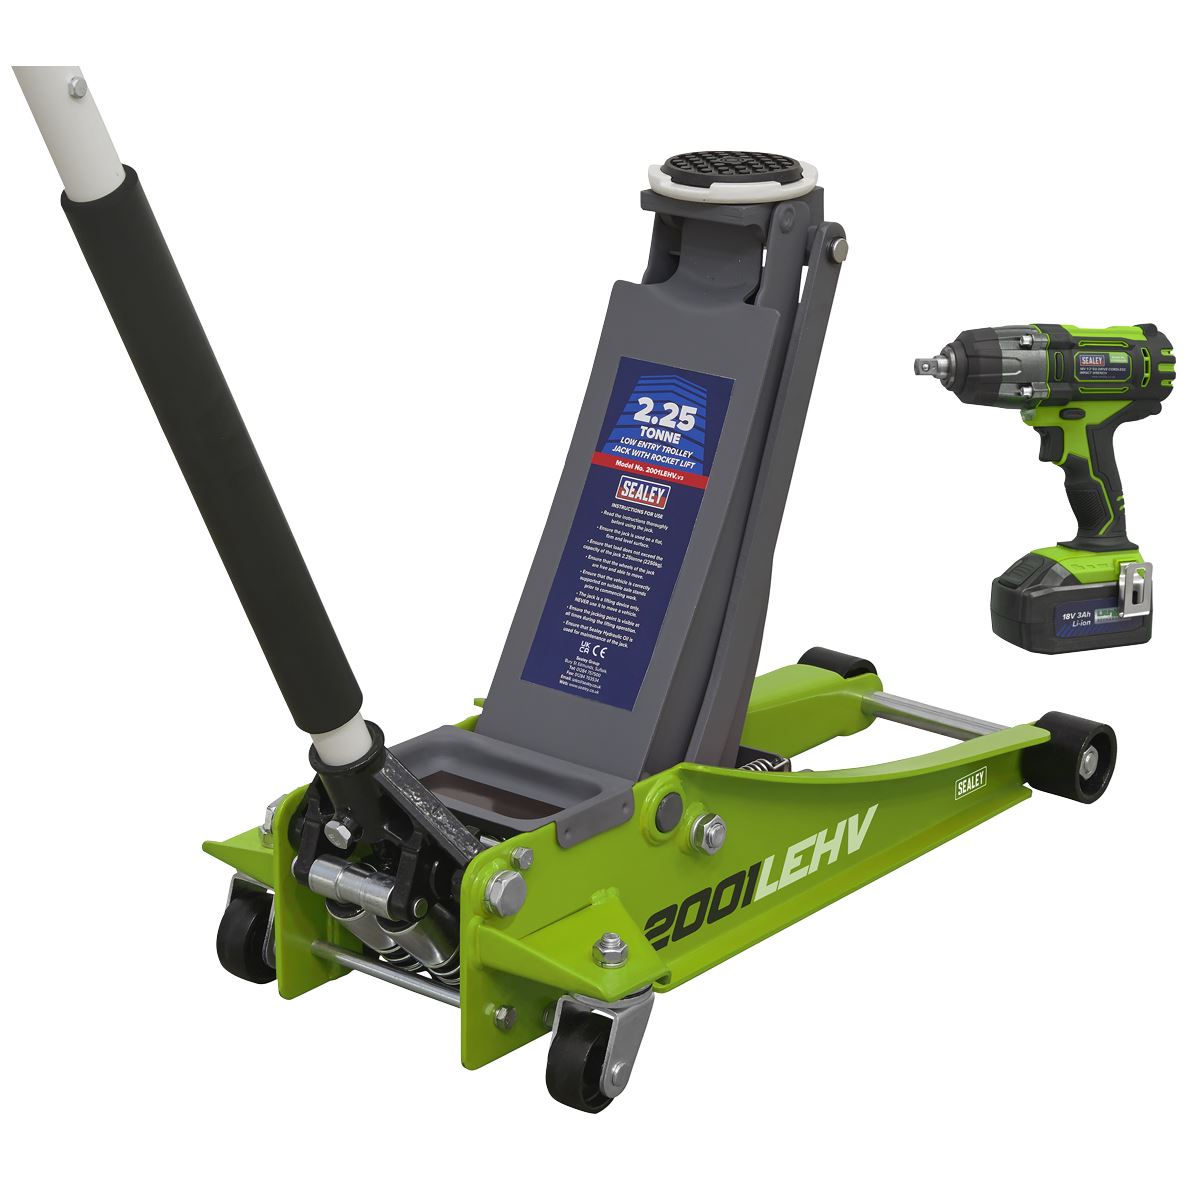 Sealey 2.2 Tonne Trolley Jack & 18V Cordless Impact Wrench - Green